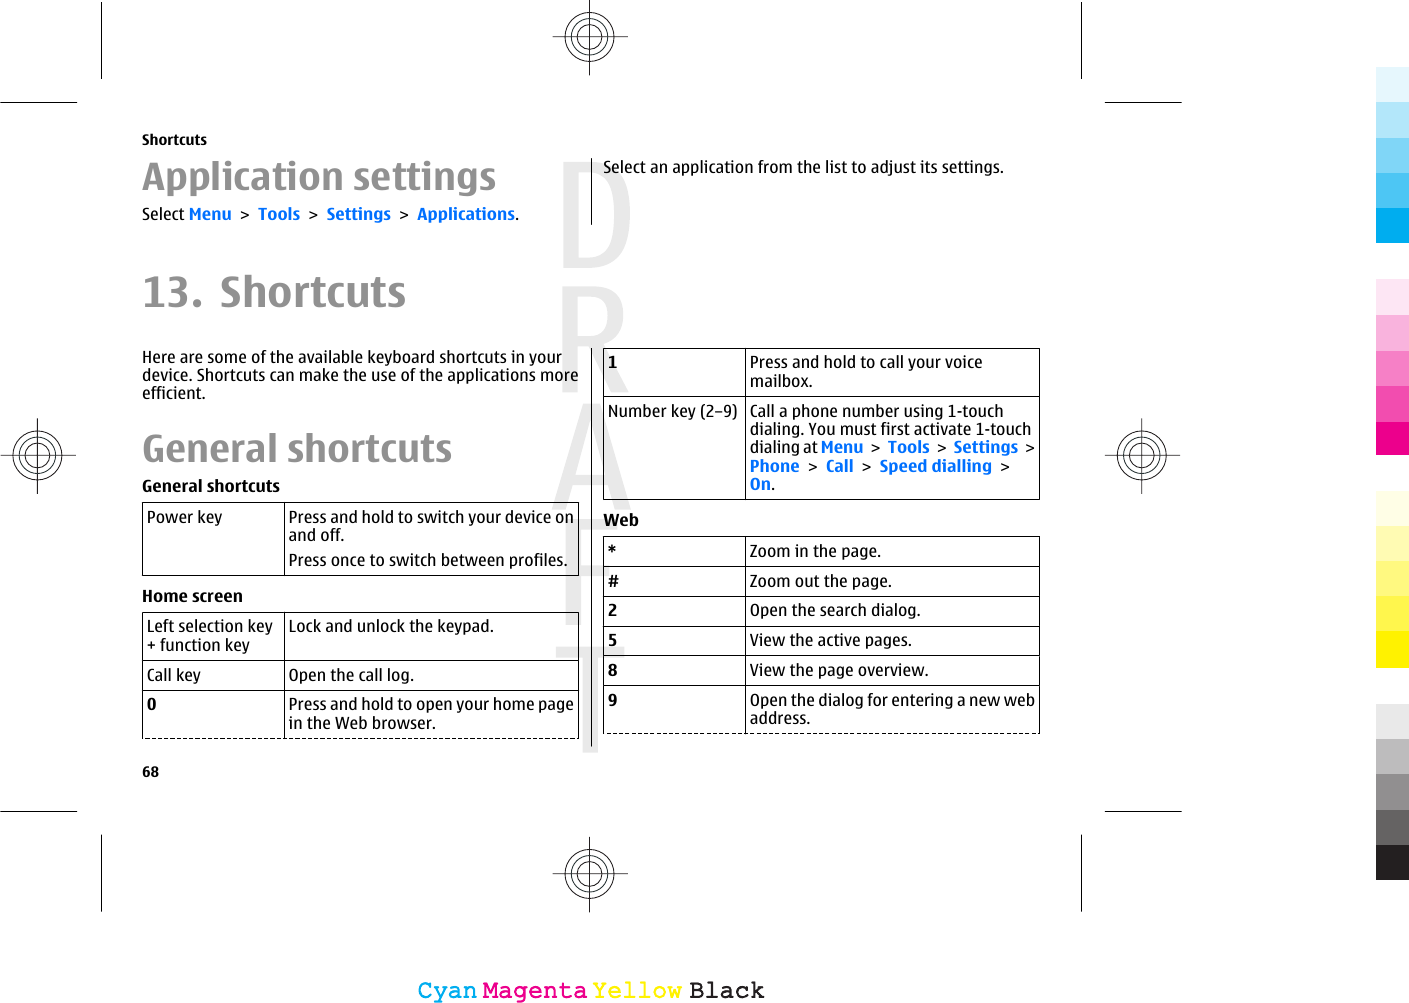 Application settingsSelect Menu &gt; Tools &gt; Settings &gt; Applications.Select an application from the list to adjust its settings.13. ShortcutsHere are some of the available keyboard shortcuts in yourdevice. Shortcuts can make the use of the applications moreefficient.General shortcutsGeneral shortcutsPower key Press and hold to switch your device onand off.Press once to switch between profiles.Home screenLeft selection key+ function keyLock and unlock the keypad.Call key Open the call log.0Press and hold to open your home pagein the Web browser.1Press and hold to call your voicemailbox.Number key (2–9) Call a phone number using 1-touchdialing. You must first activate 1-touchdialing at Menu &gt; Tools &gt; Settings &gt;Phone &gt; Call &gt; Speed dialling &gt;On.Web*Zoom in the page.#Zoom out the page.2Open the search dialog.5View the active pages.8View the page overview.9Open the dialog for entering a new webaddress.Shortcuts68CyanCyanMagentaMagentaYellowYellowBlackBlack